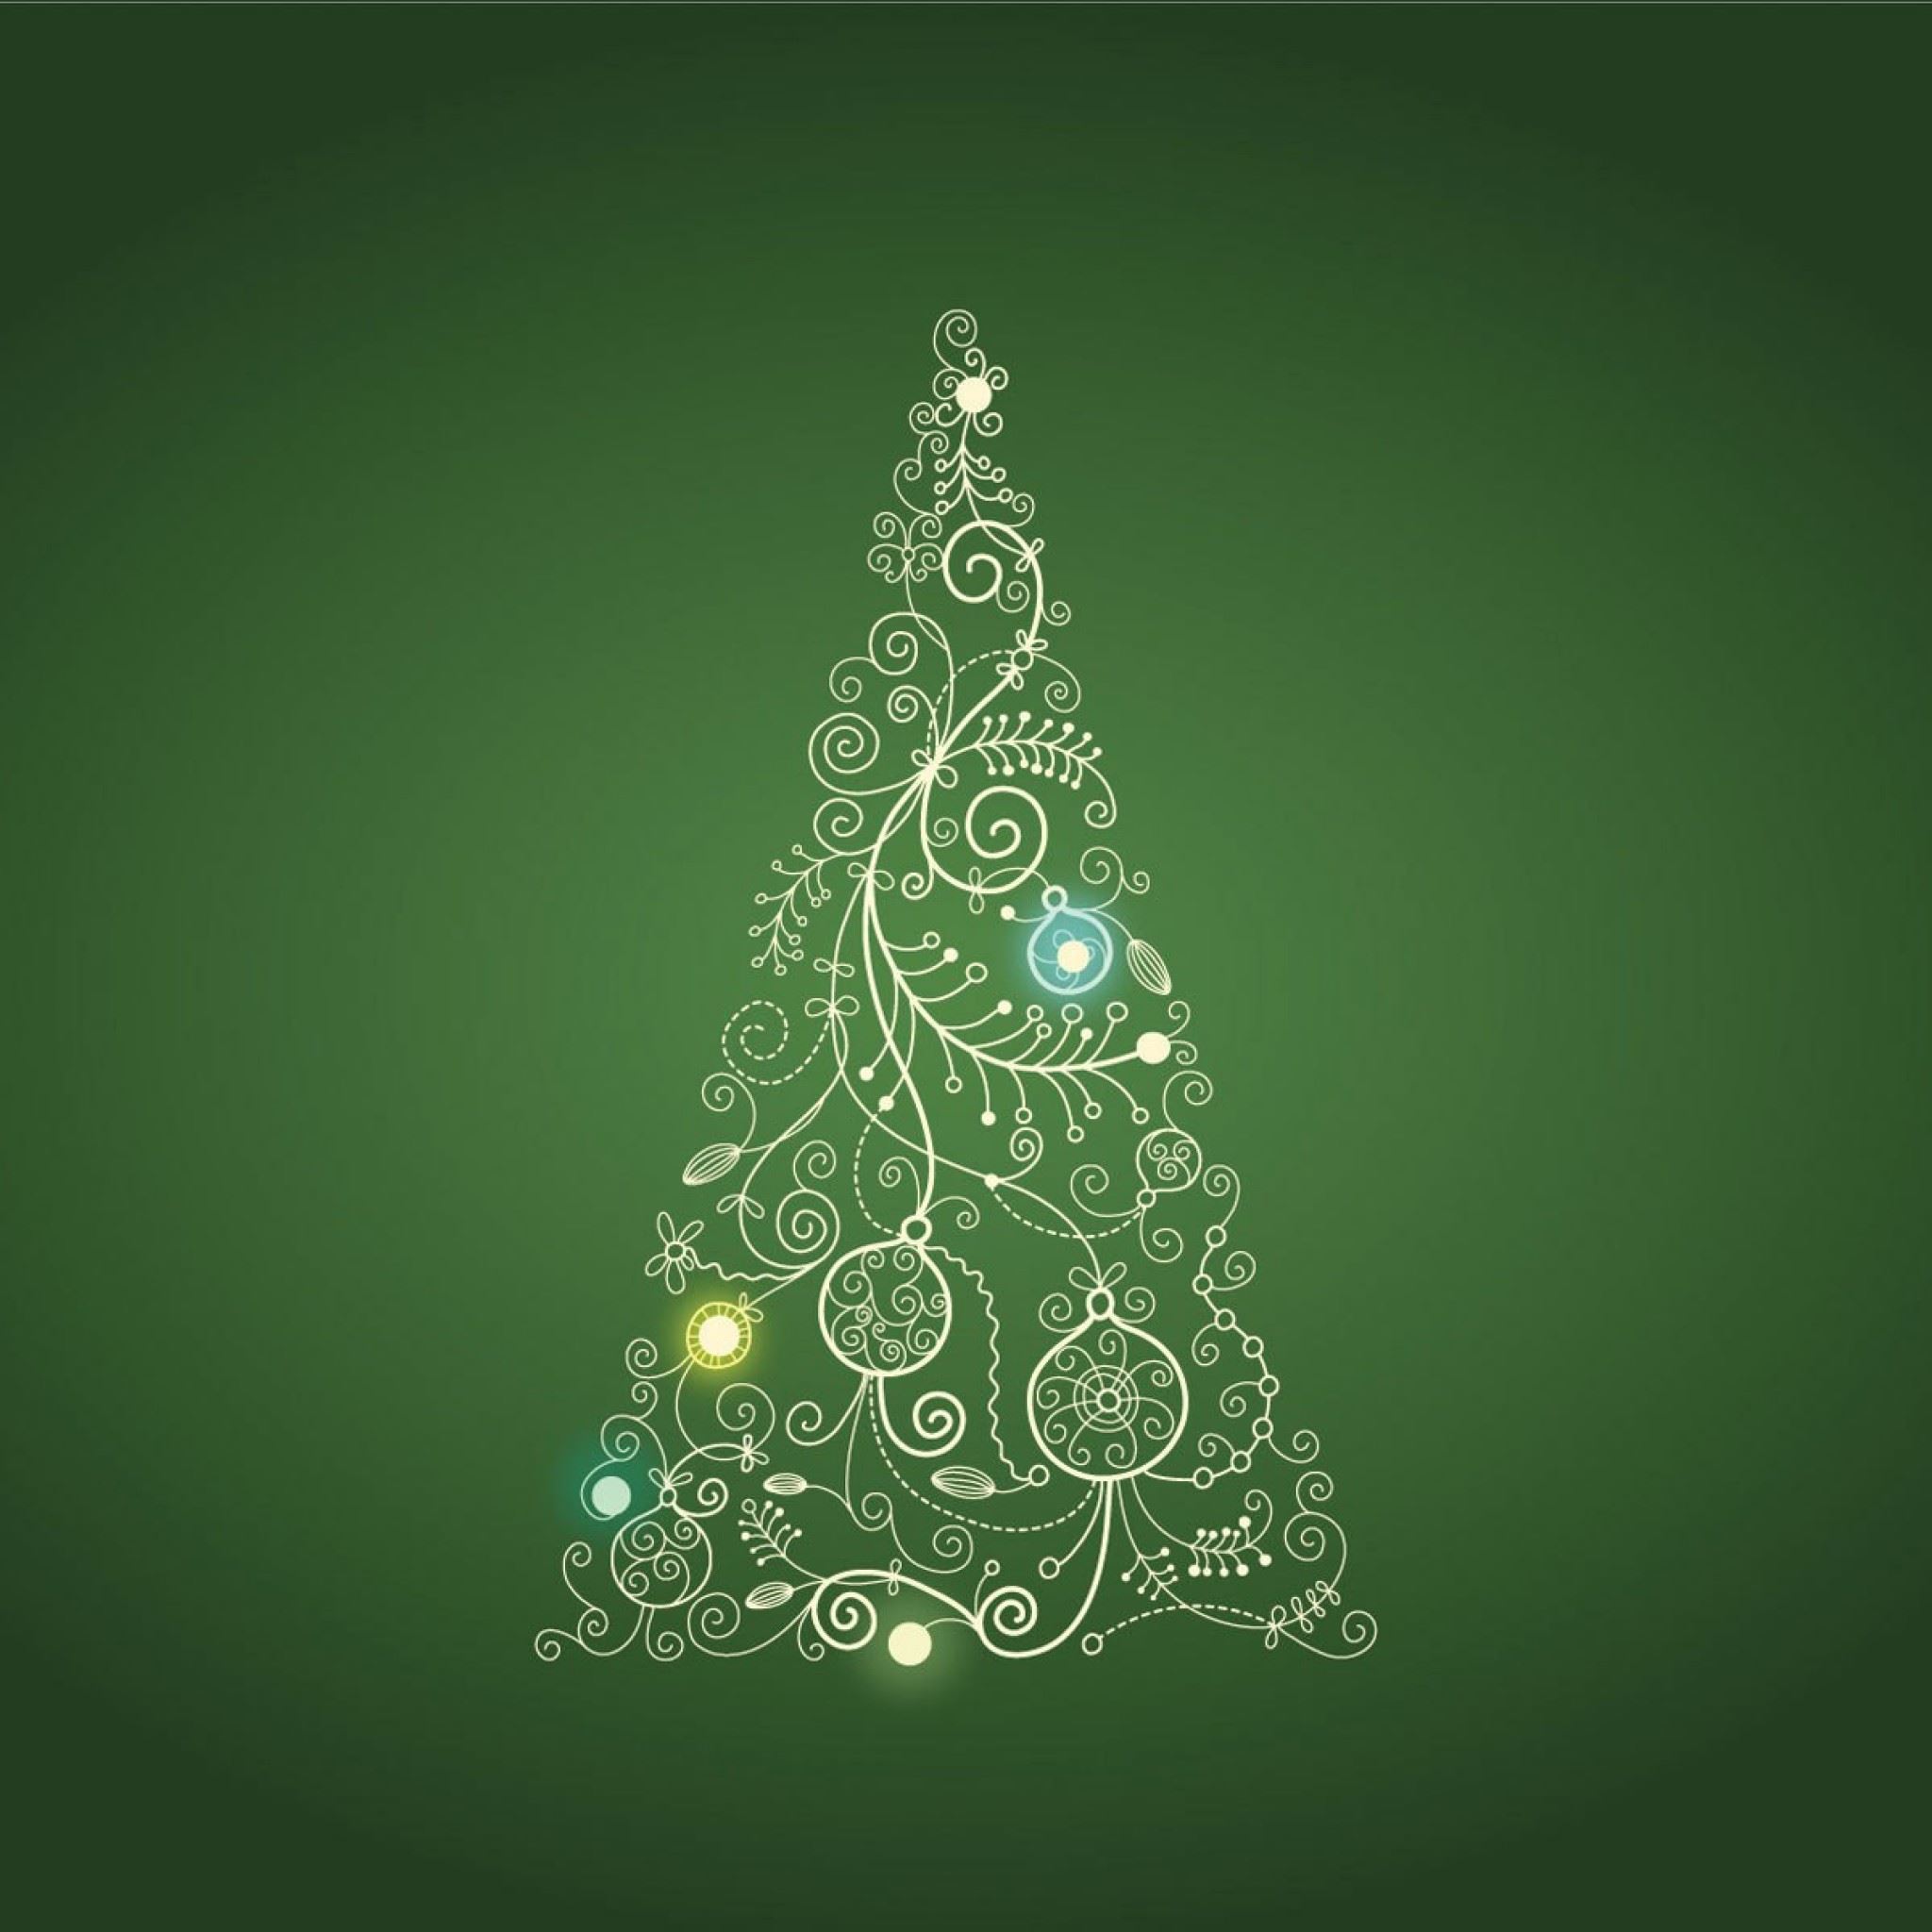 Christmas Tree on Green Background Illustration iPad Air Wallpaper Download | iPhone Wallpapers ...